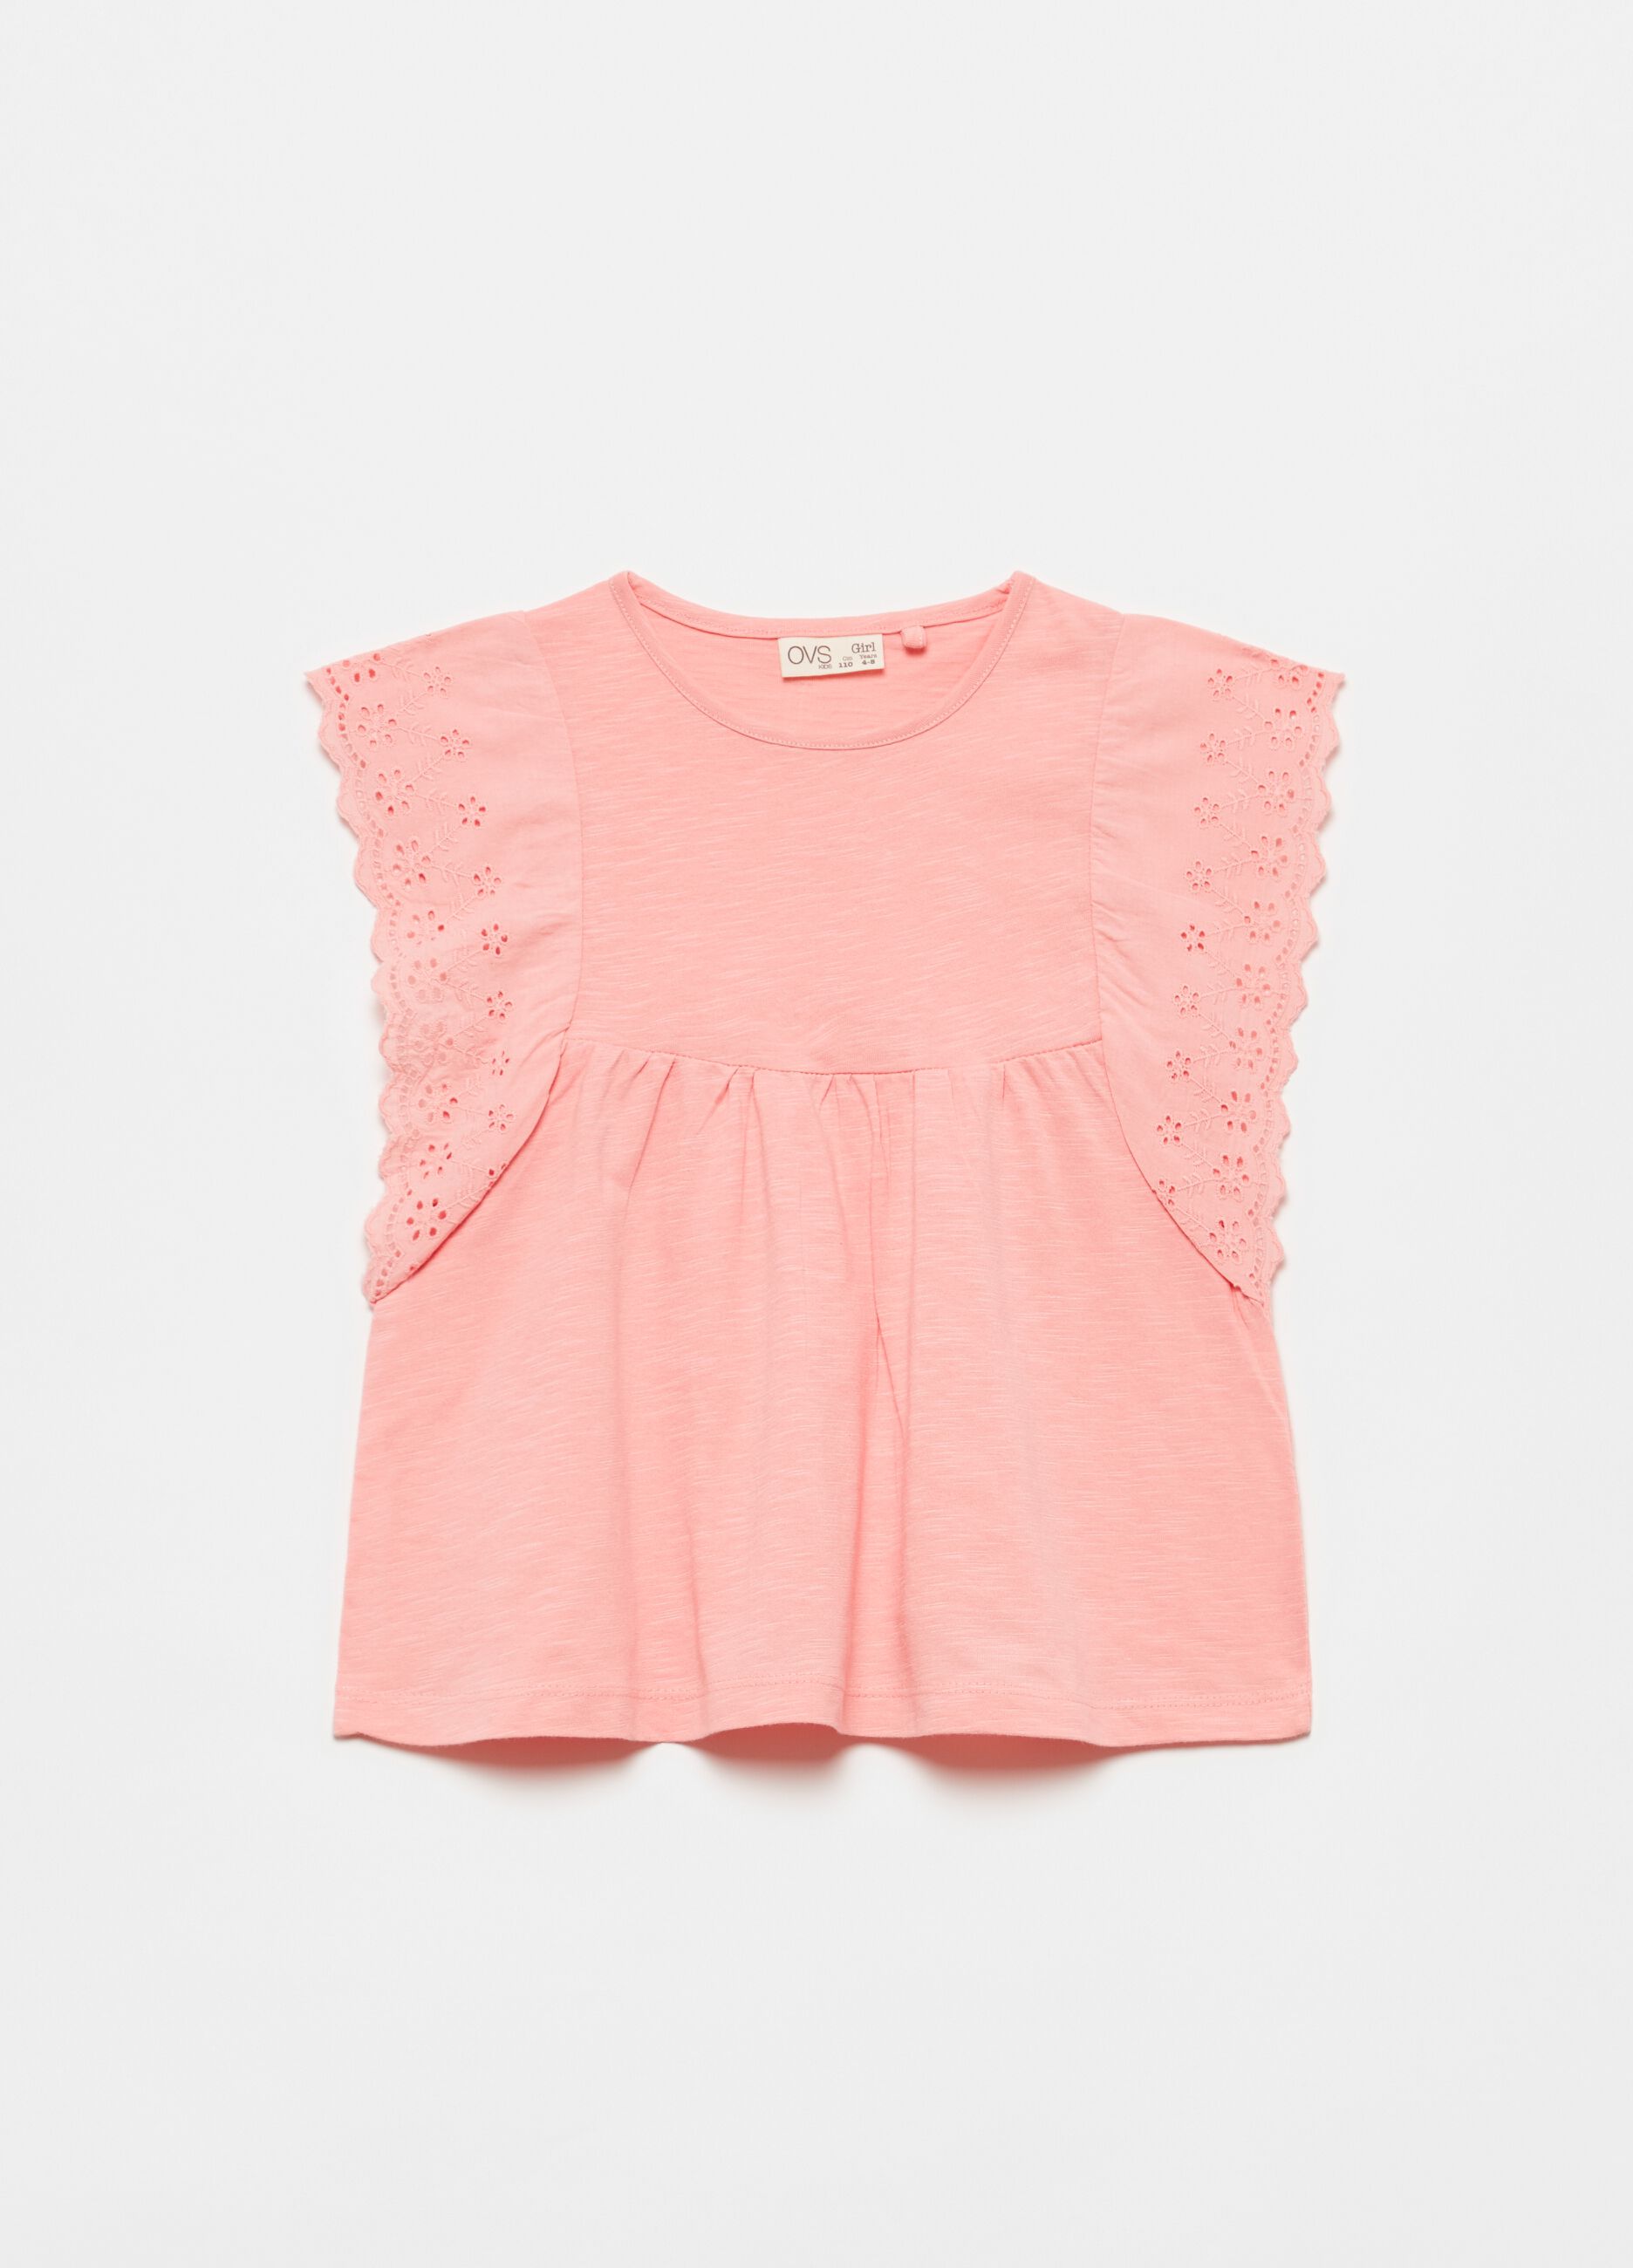 T-shirt in 100% cotton with broderie anglaise flounces